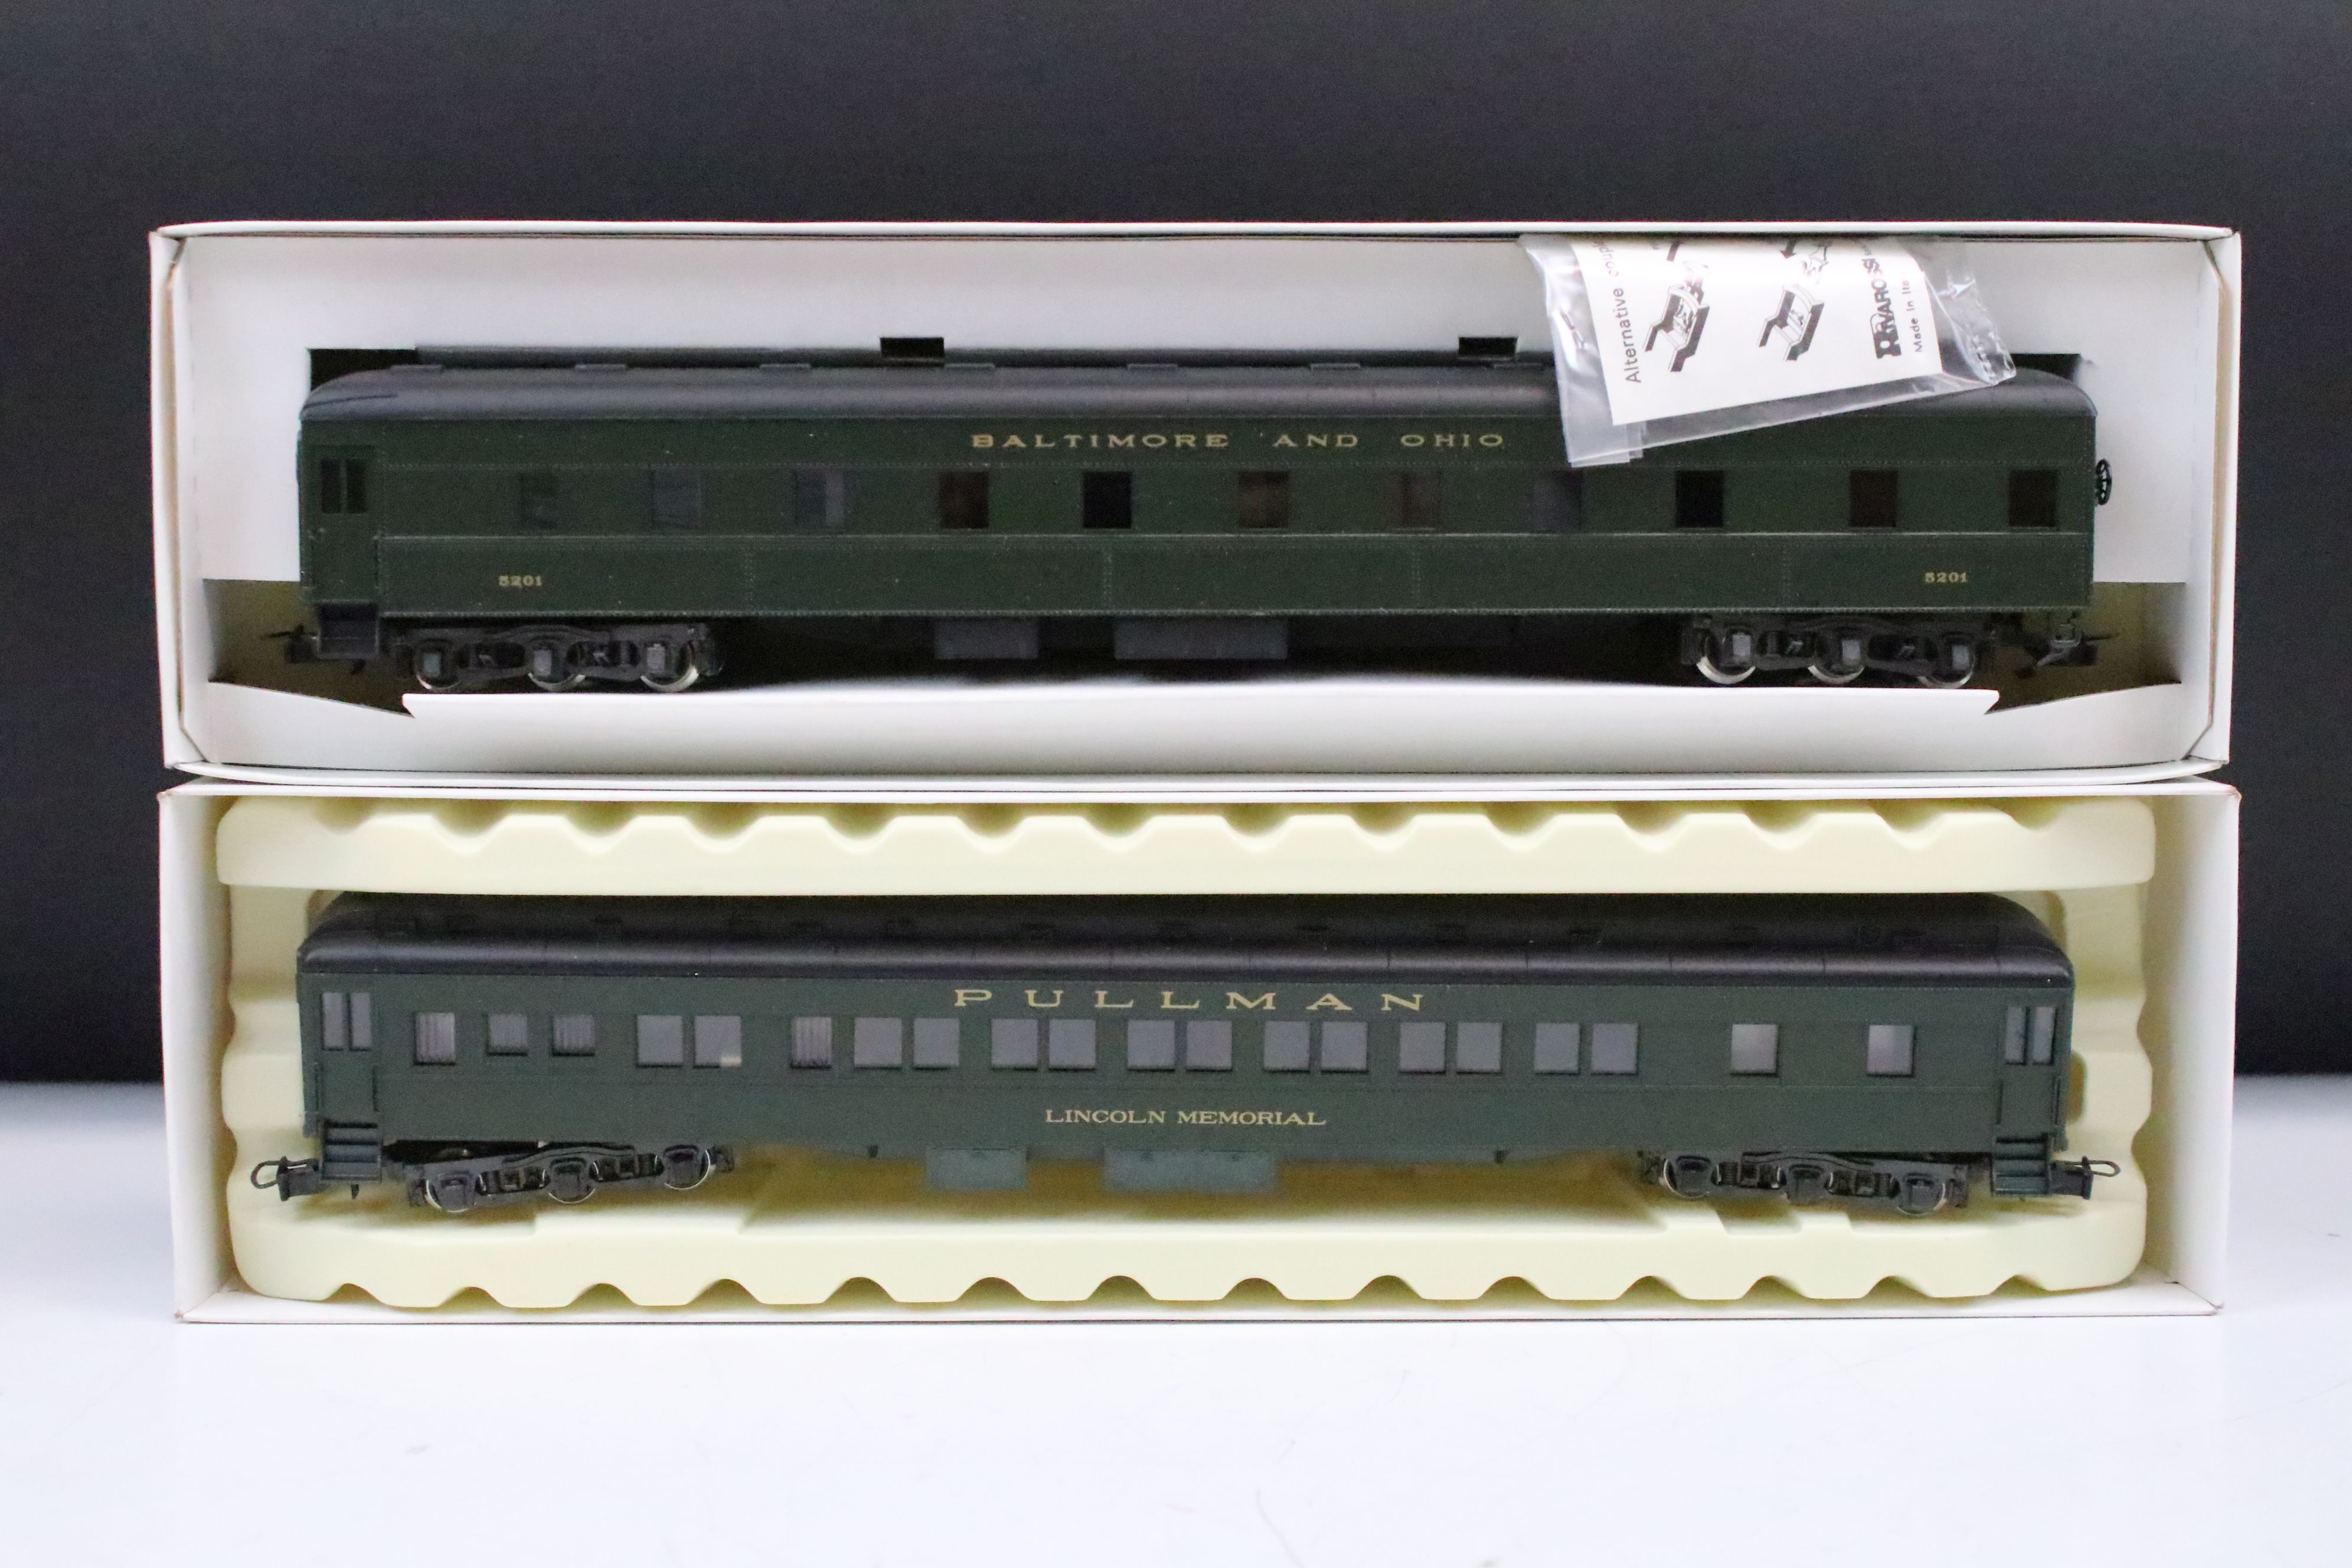 Six boxed Rivarossi items of rolling stock to include 2693, 2695, 2793, 2692, 2793-0 and 2694 - Image 2 of 5